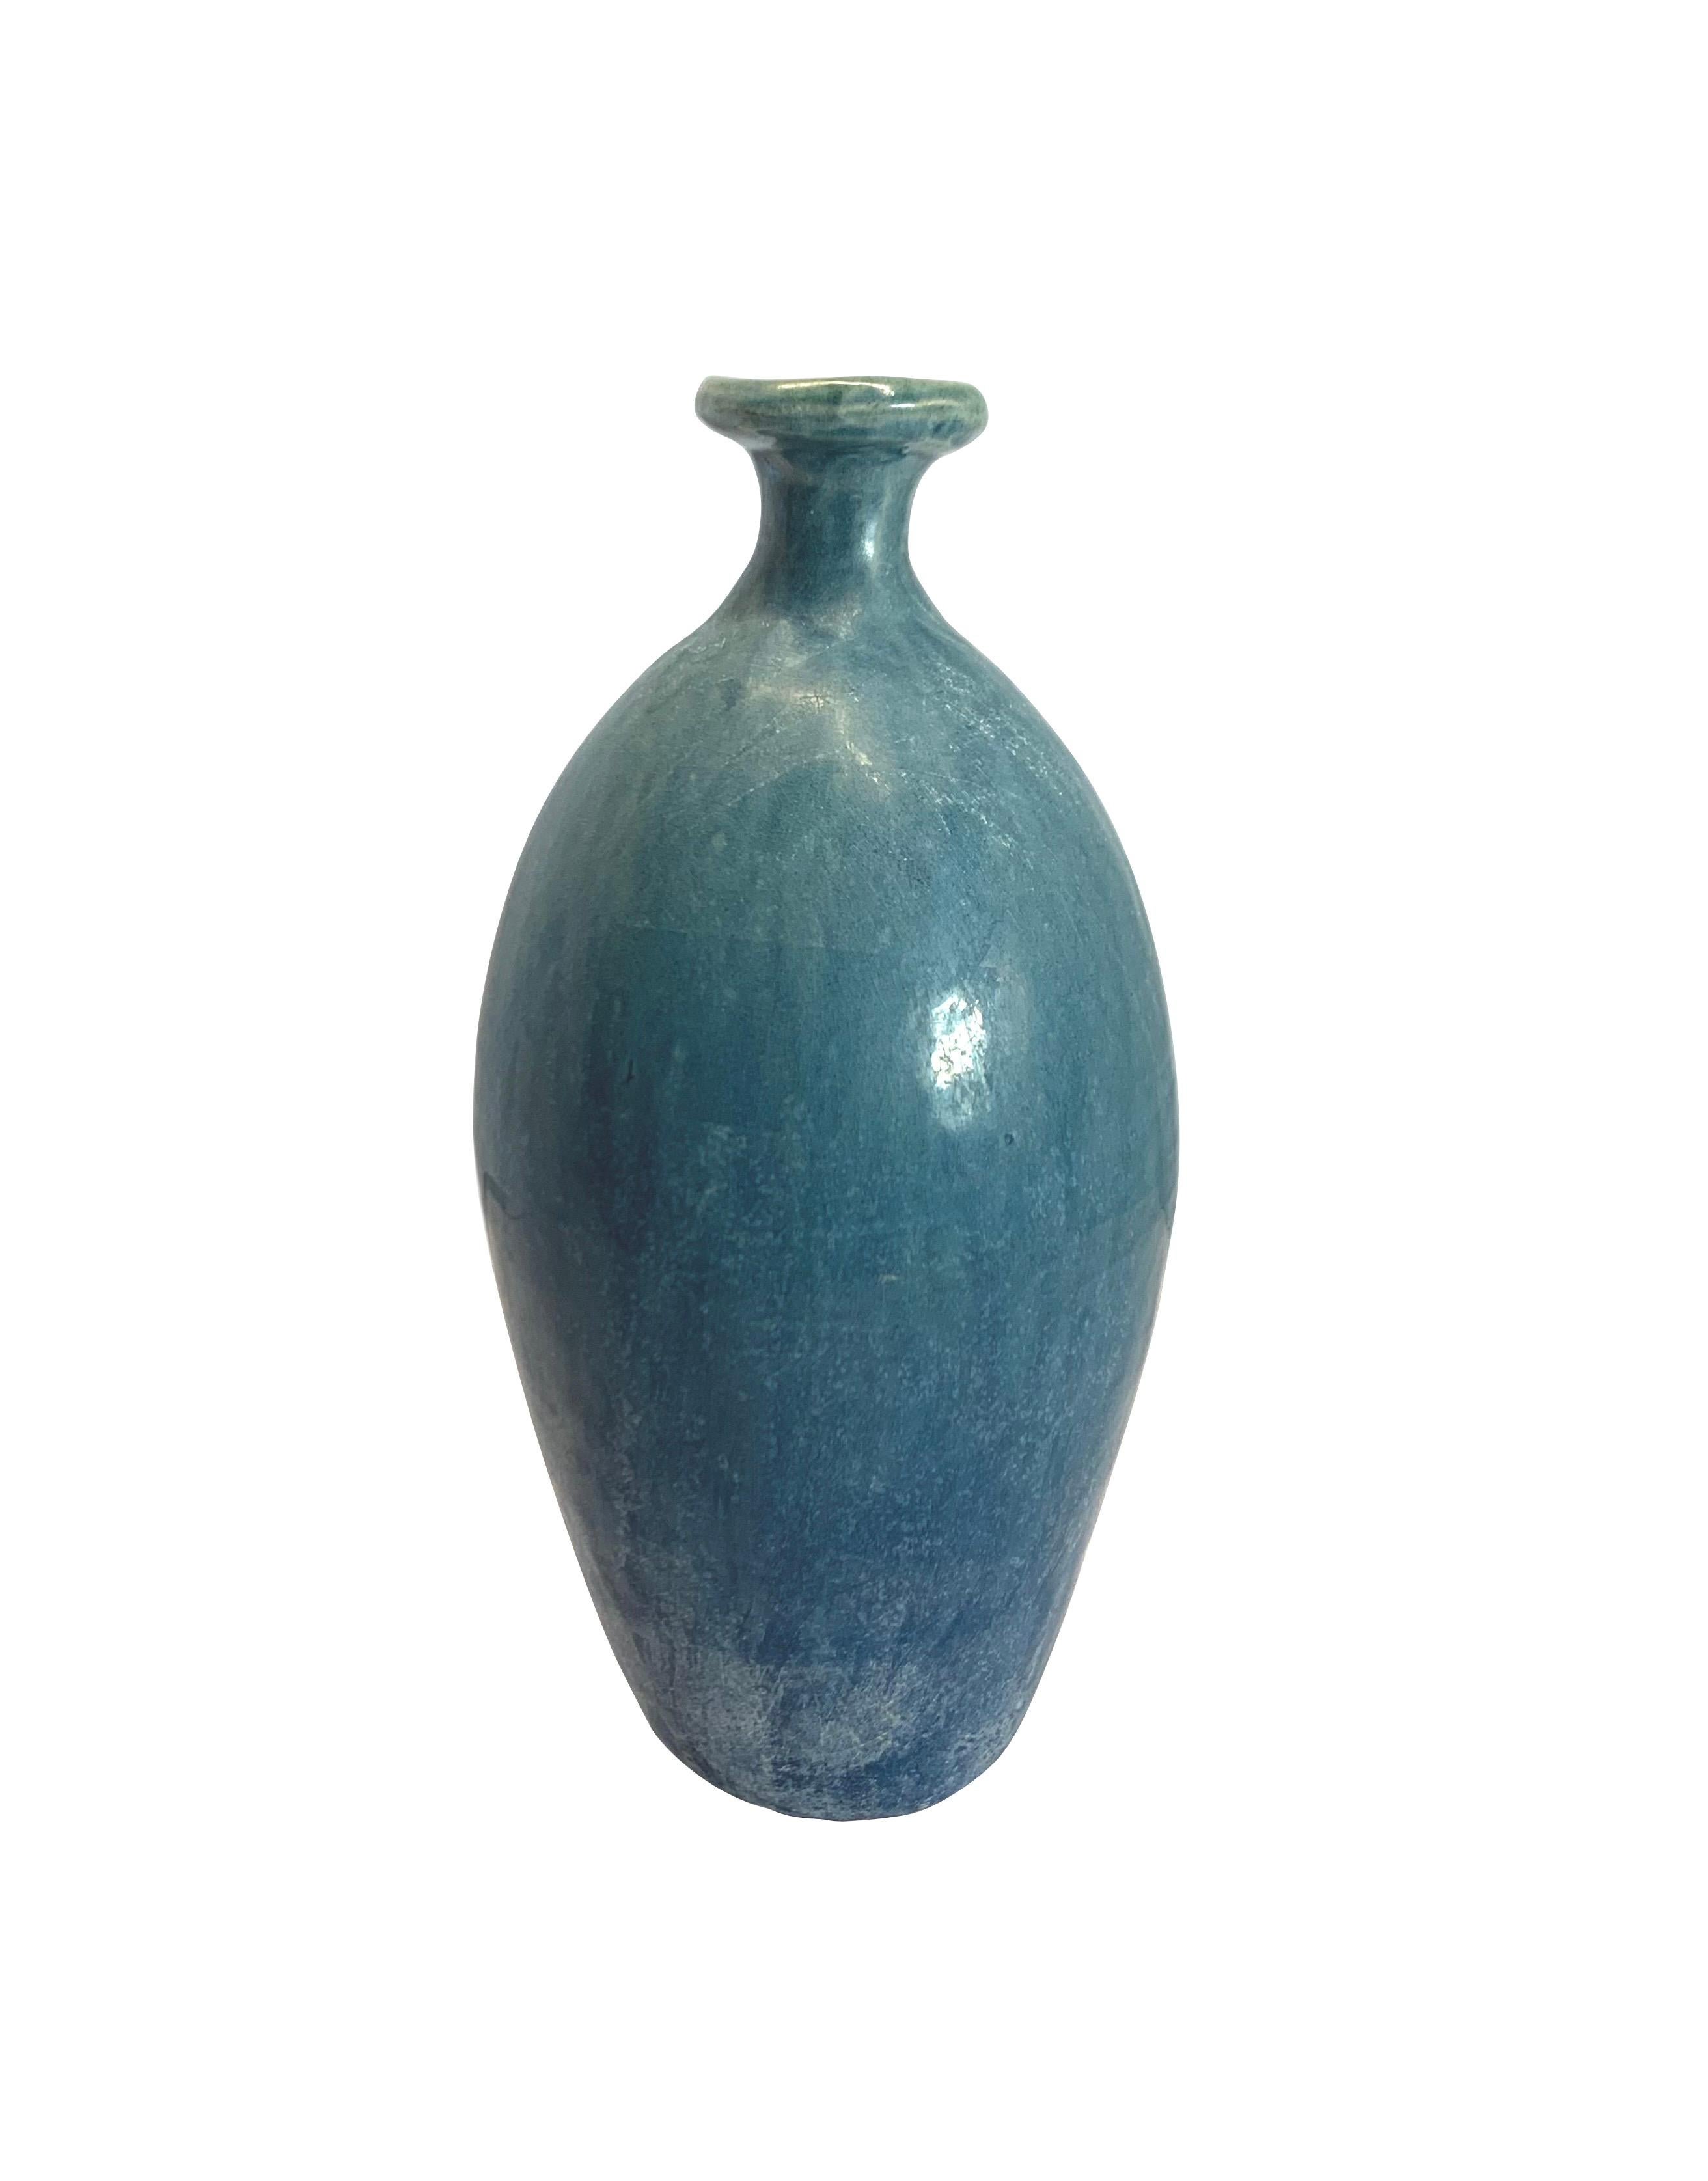 Contemporary Chinese washed blue matte glazed vase.
Tall slender shape with thin spout.
Also as Classic ginger shape S5752.